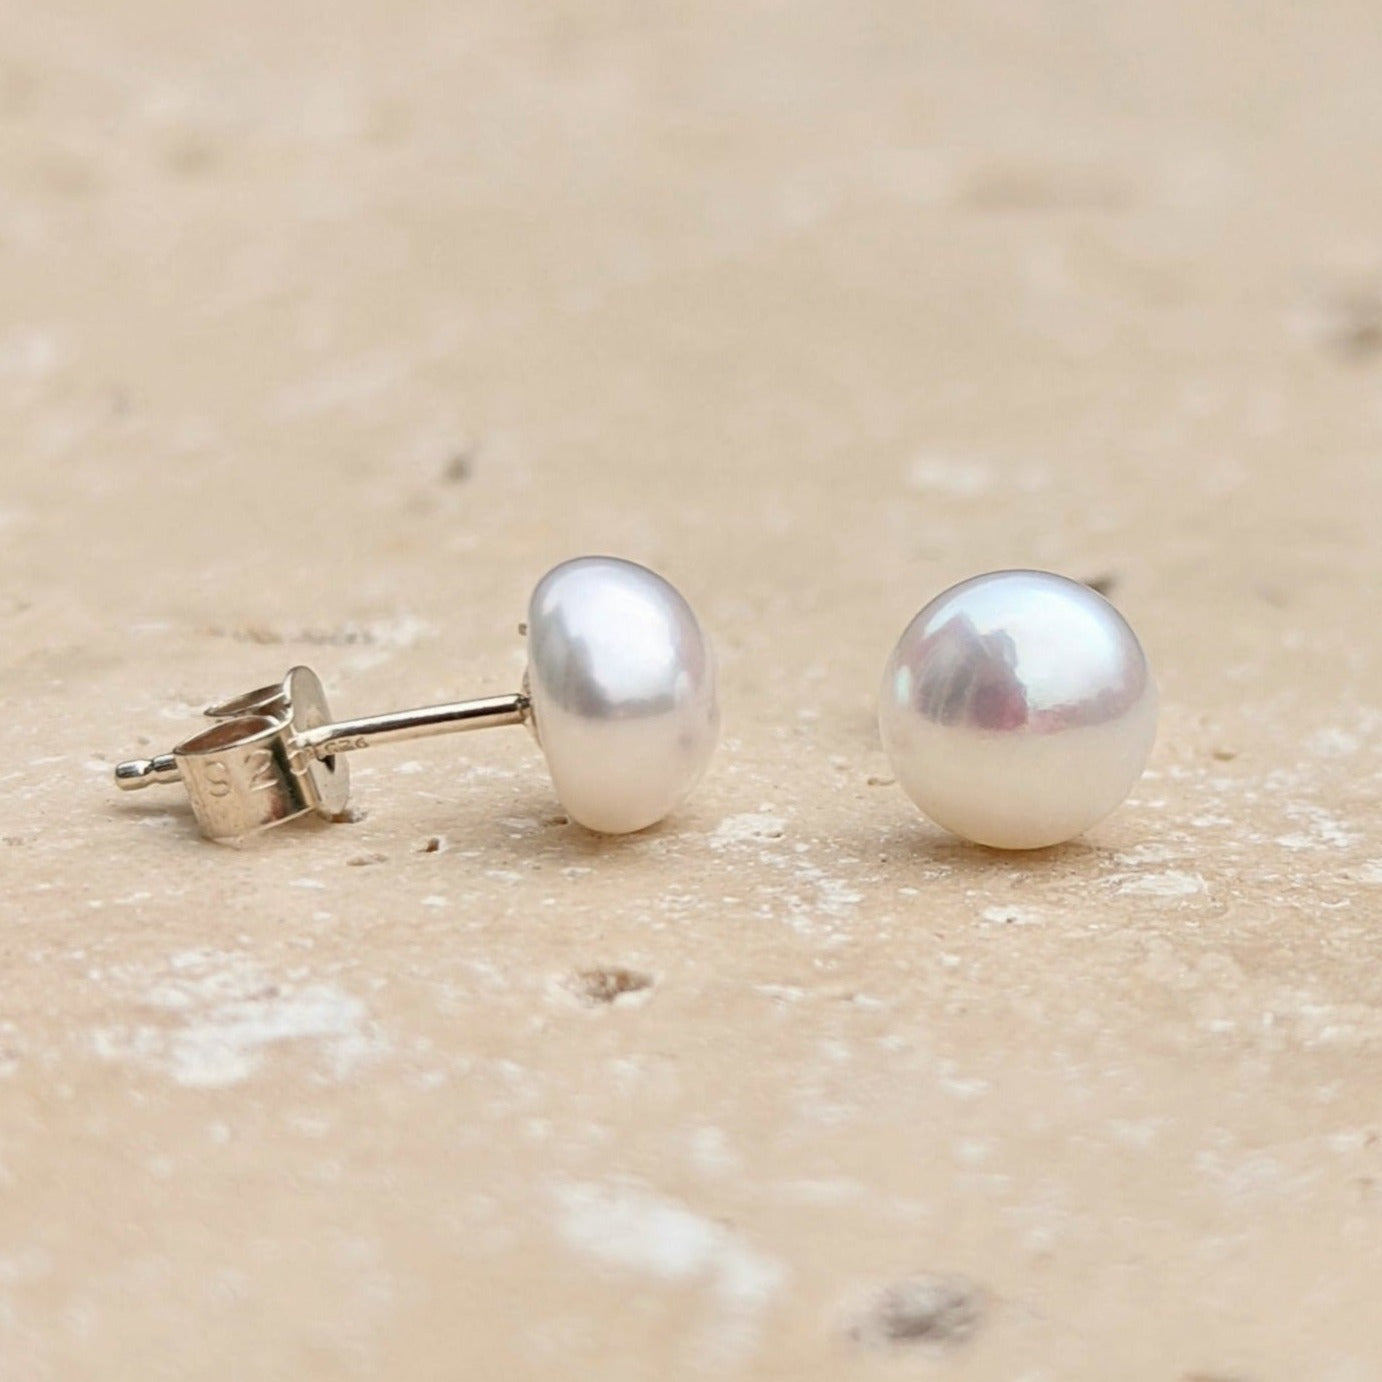 Pair of sterling silver white button pearl stud earrings